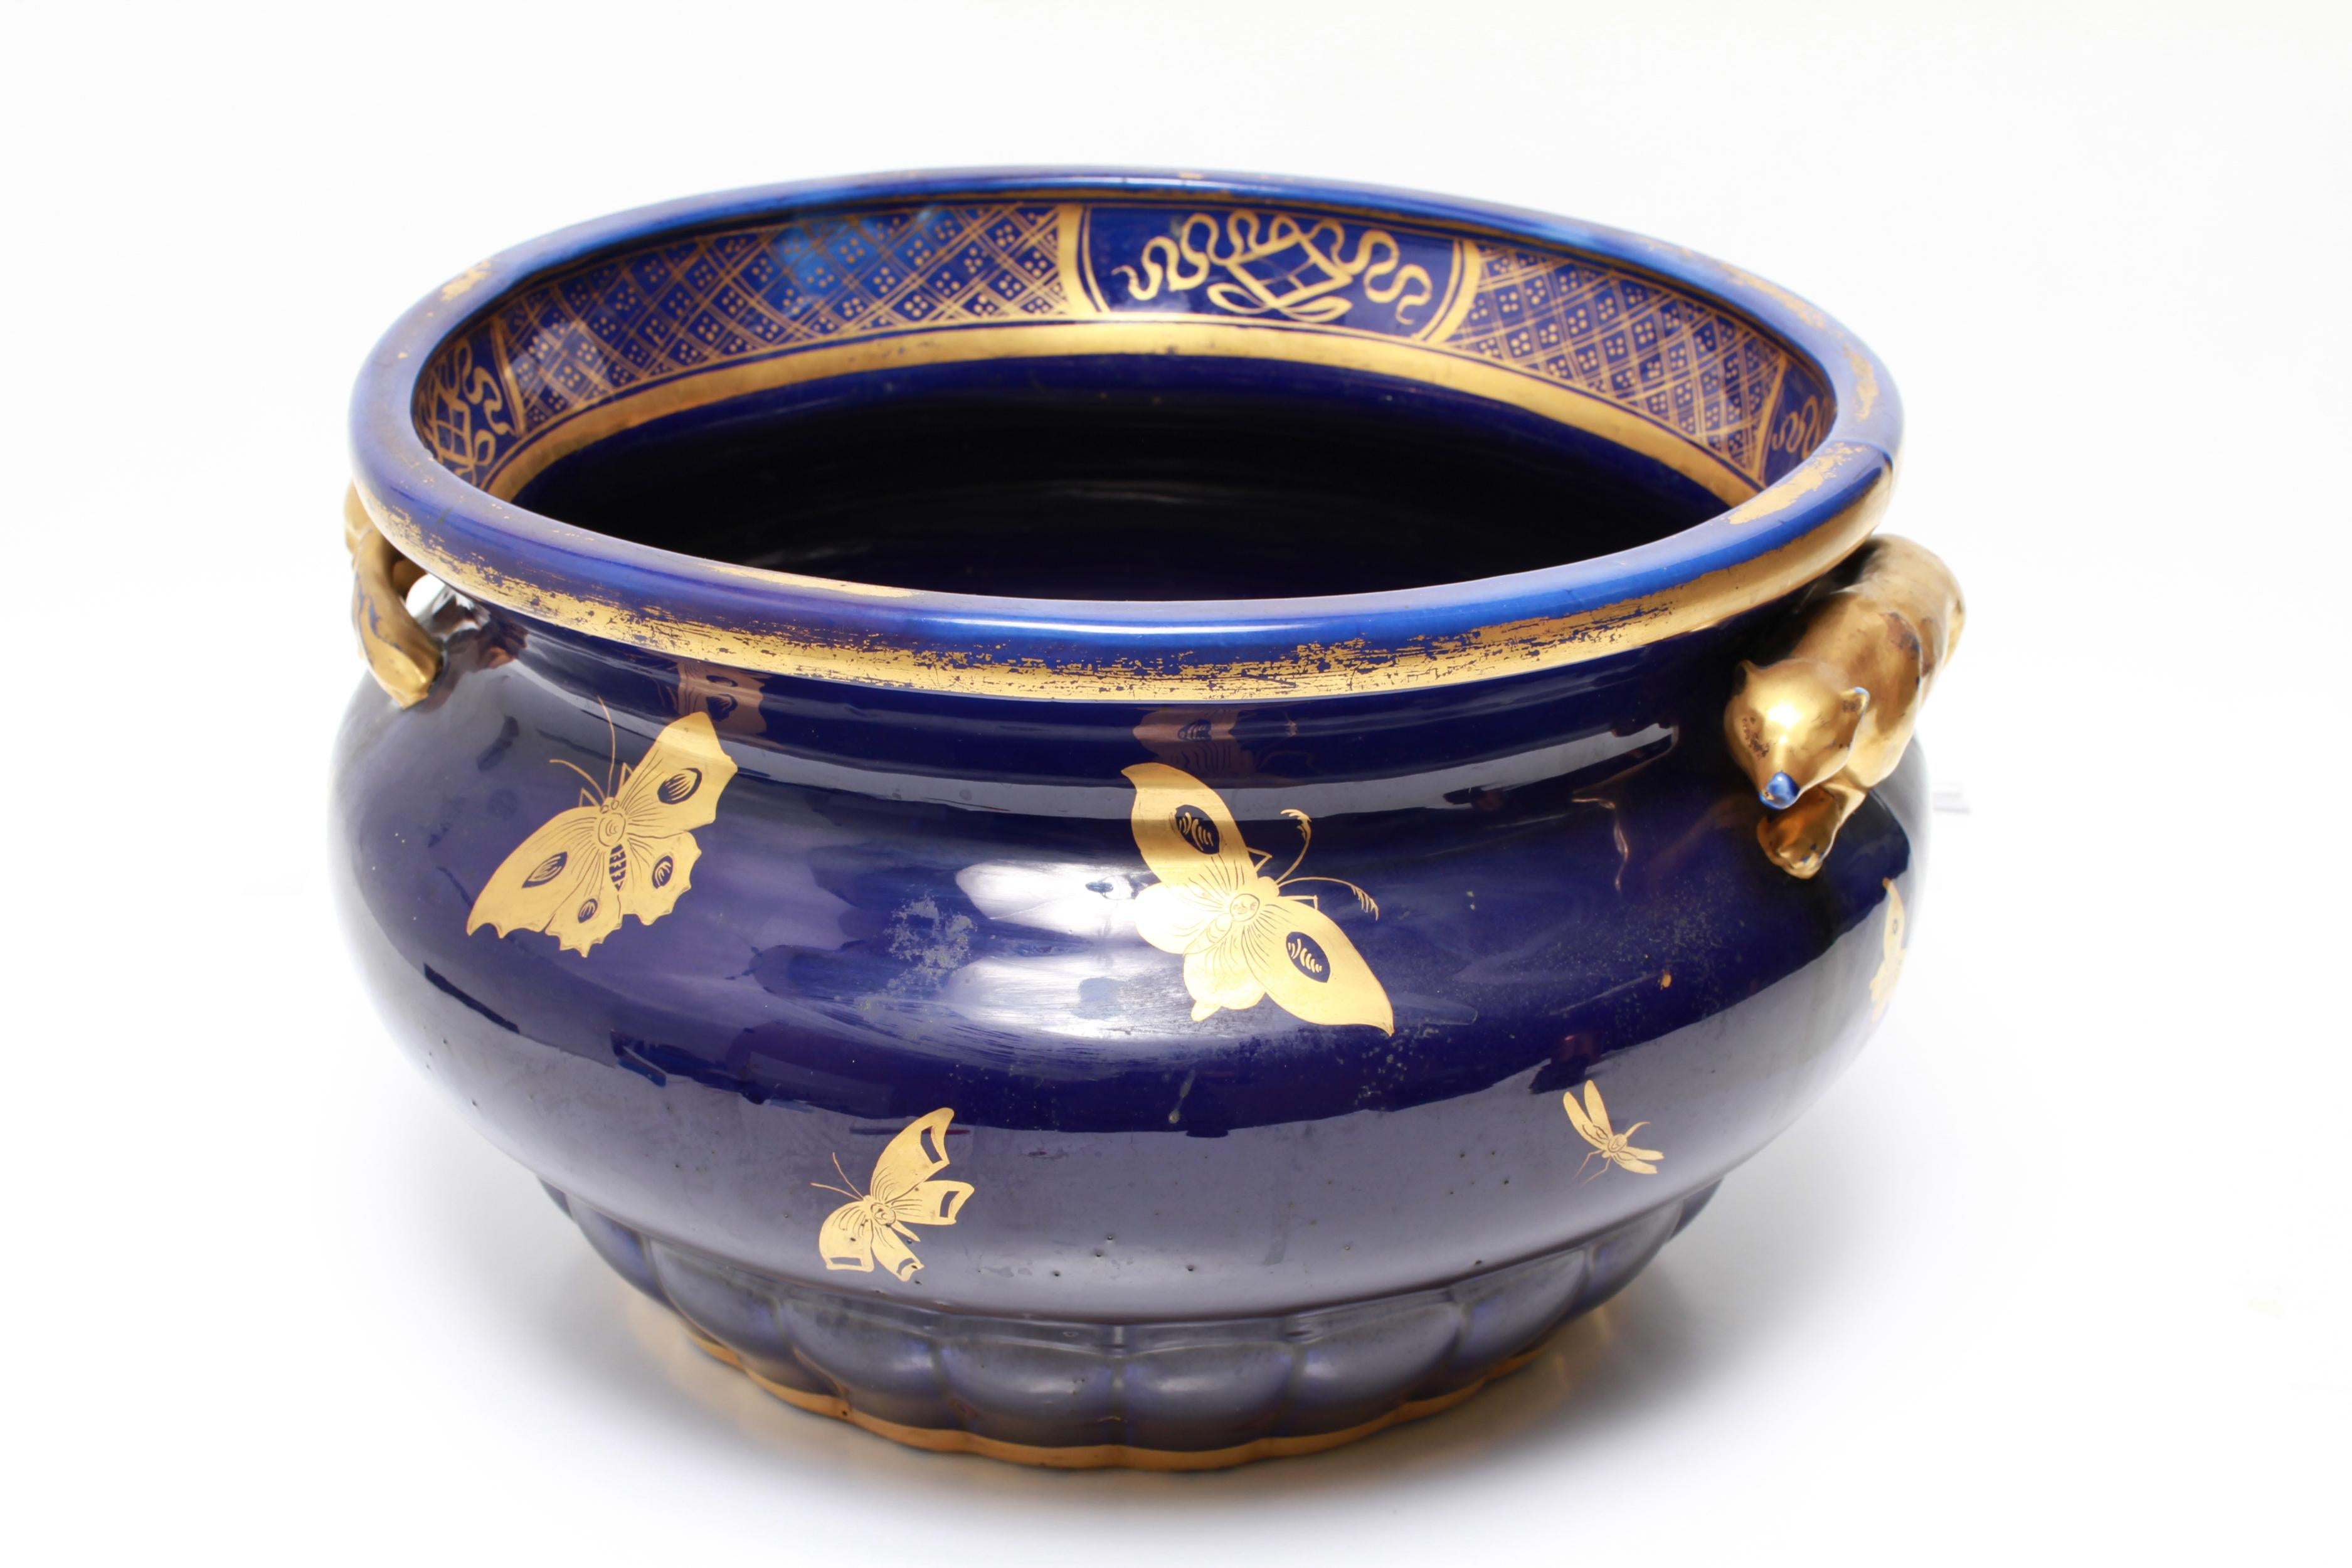 English Chinoiserie porcelain jardiniere, possibly made by Spode, in glazed cobalt blue ground and hand-painted with gilt flowers and insects, with two applied gilt fox handles. Numerous stilt marks to the underside, some glazed. Some wear and